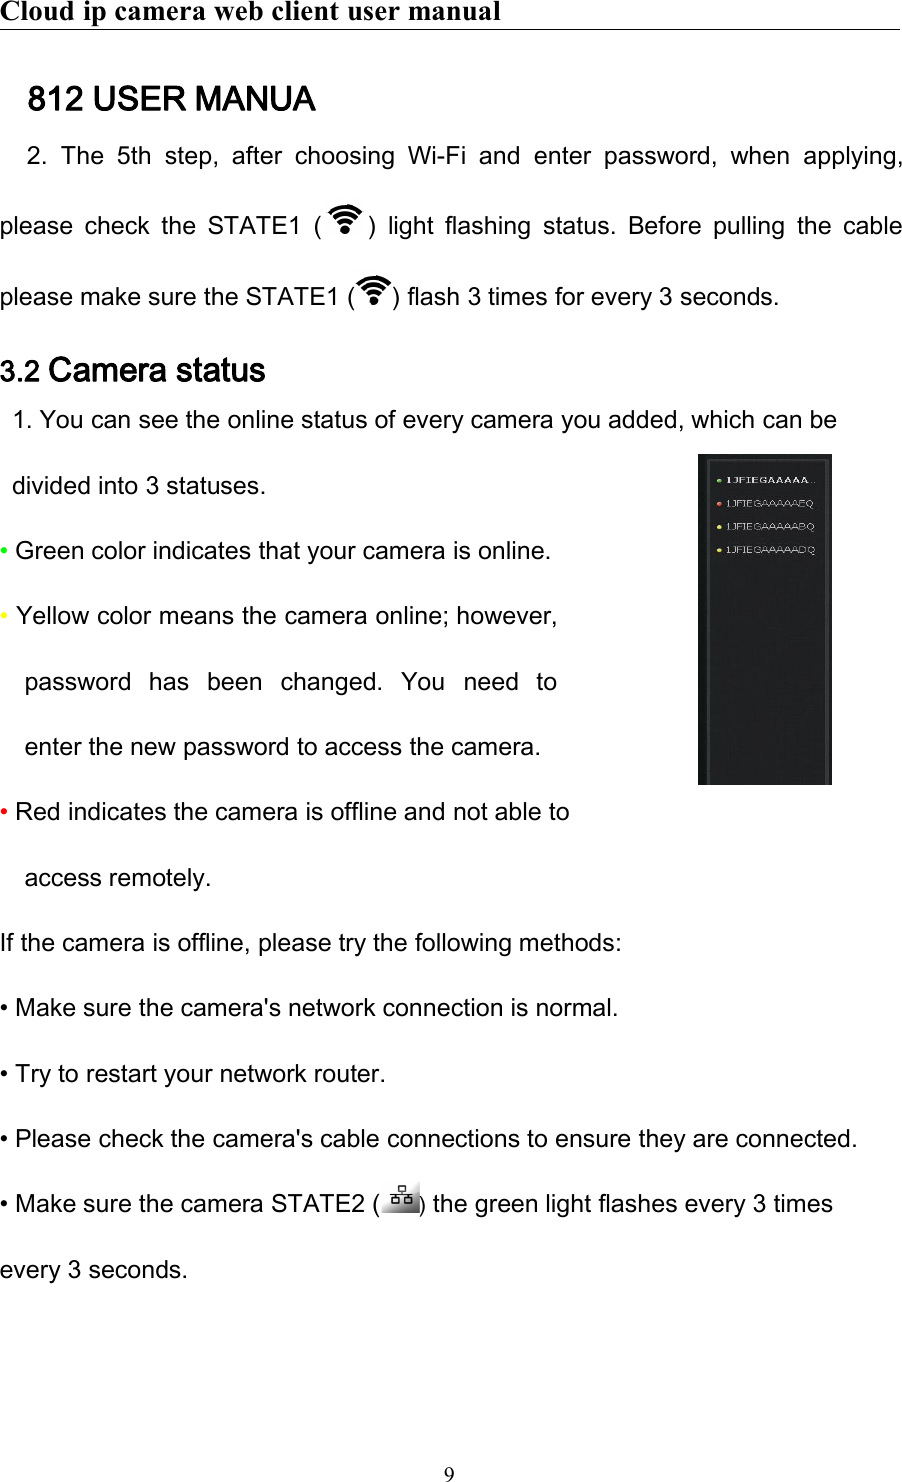 Cloud ip camera web client user manual9812 USER MANUA2. The 5th step, after choosing Wi-Fi and enter password, when applying,please check the STATE1 ( ) light flashing status. Before pulling the cableplease make sure the STATE1 ( ) flash 3 times for every 3 seconds.3.2 Camera status1. You can see the online status of every camera you added, which can bedivided into 3 statuses.•Green color indicates that your camera is online.•Yellow color means the camera online; however,password has been changed. You need toenter the new password to access the camera.•Red indicates the camera is offline and not able toaccess remotely.If the camera is offline, please try the following methods:• Make sure the camera&apos;s network connection is normal.• Try to restart your network router.• Please check the camera&apos;s cable connections to ensure they are connected.• Make sure the camera STATE2 ( )the green light flashes every 3 timesevery 3 seconds.